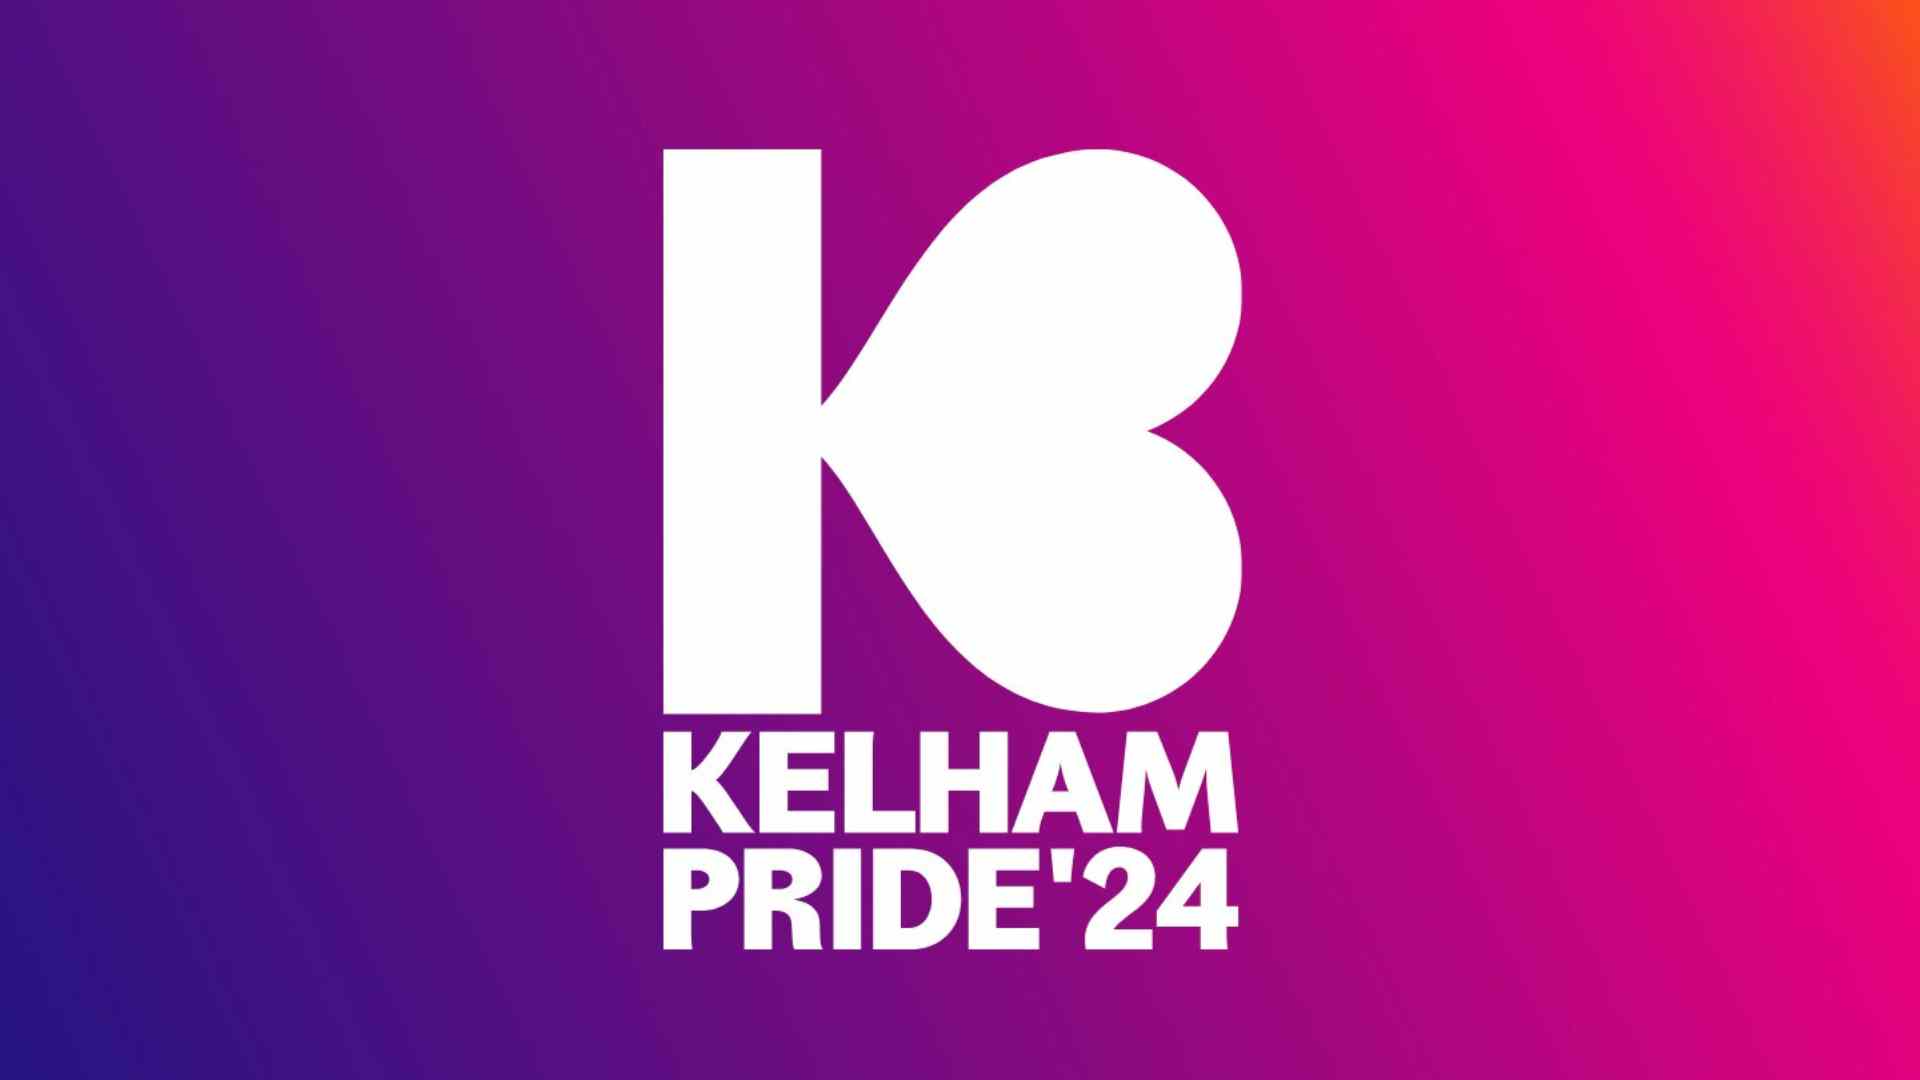 Kelham Pride '24 logo with a purple to pink fade background